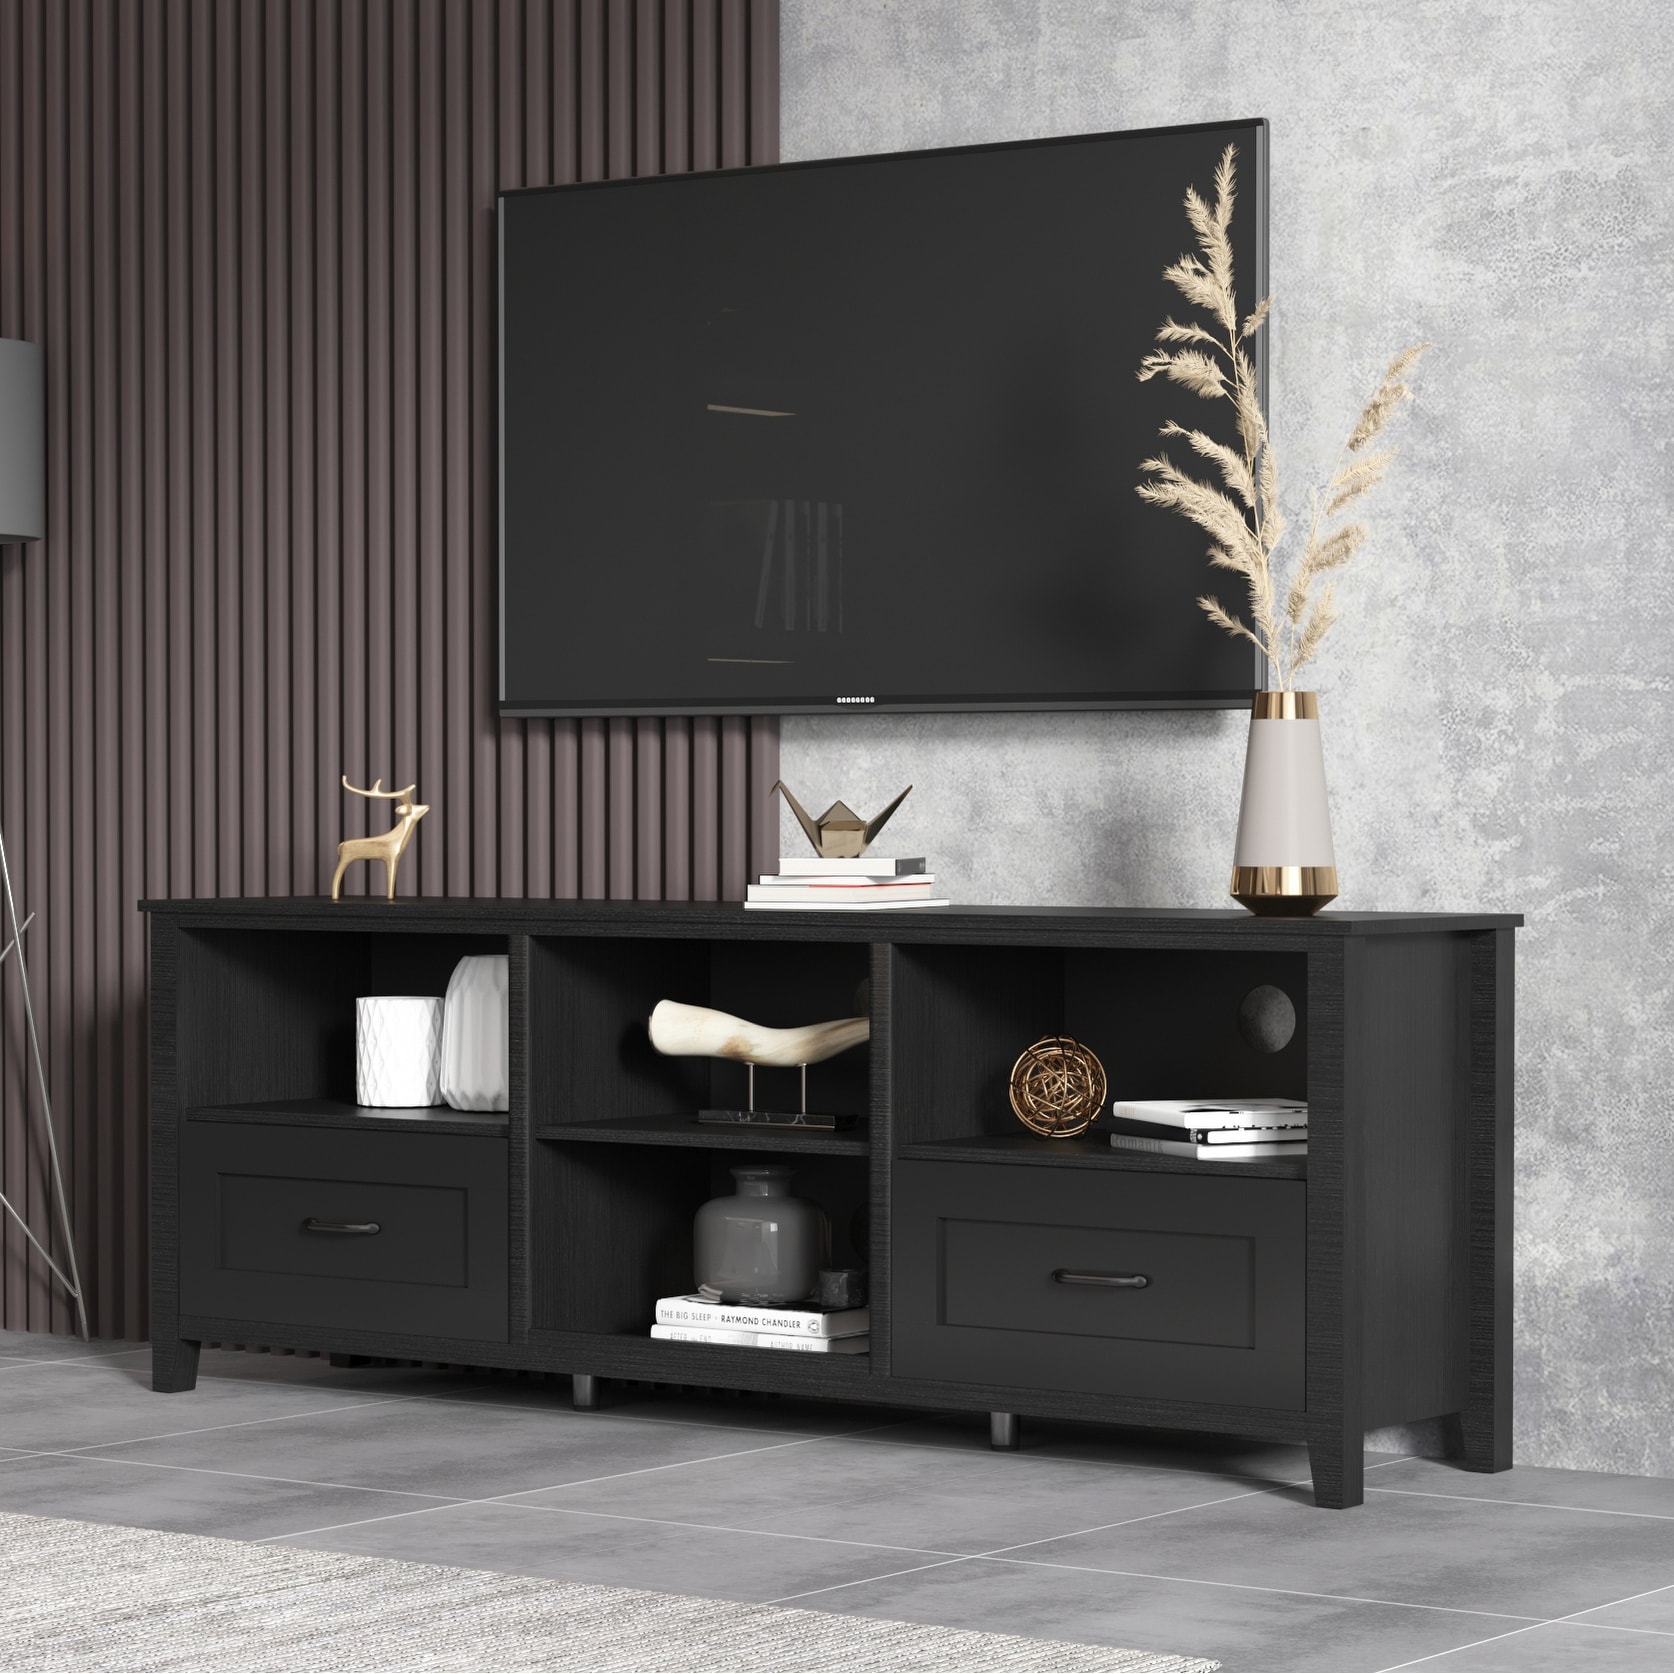 https://ak1.ostkcdn.com/images/products/is/images/direct/2d3d1b133cac4689d23711f1b2fa682fb8e80b7c/Entertainment-Cente-Media-TV-Console-Table-with-2-Removable-Drawers-and-4-High-Capacity-Storage-Shelves--Coffee-Bar-Cabinet.jpg